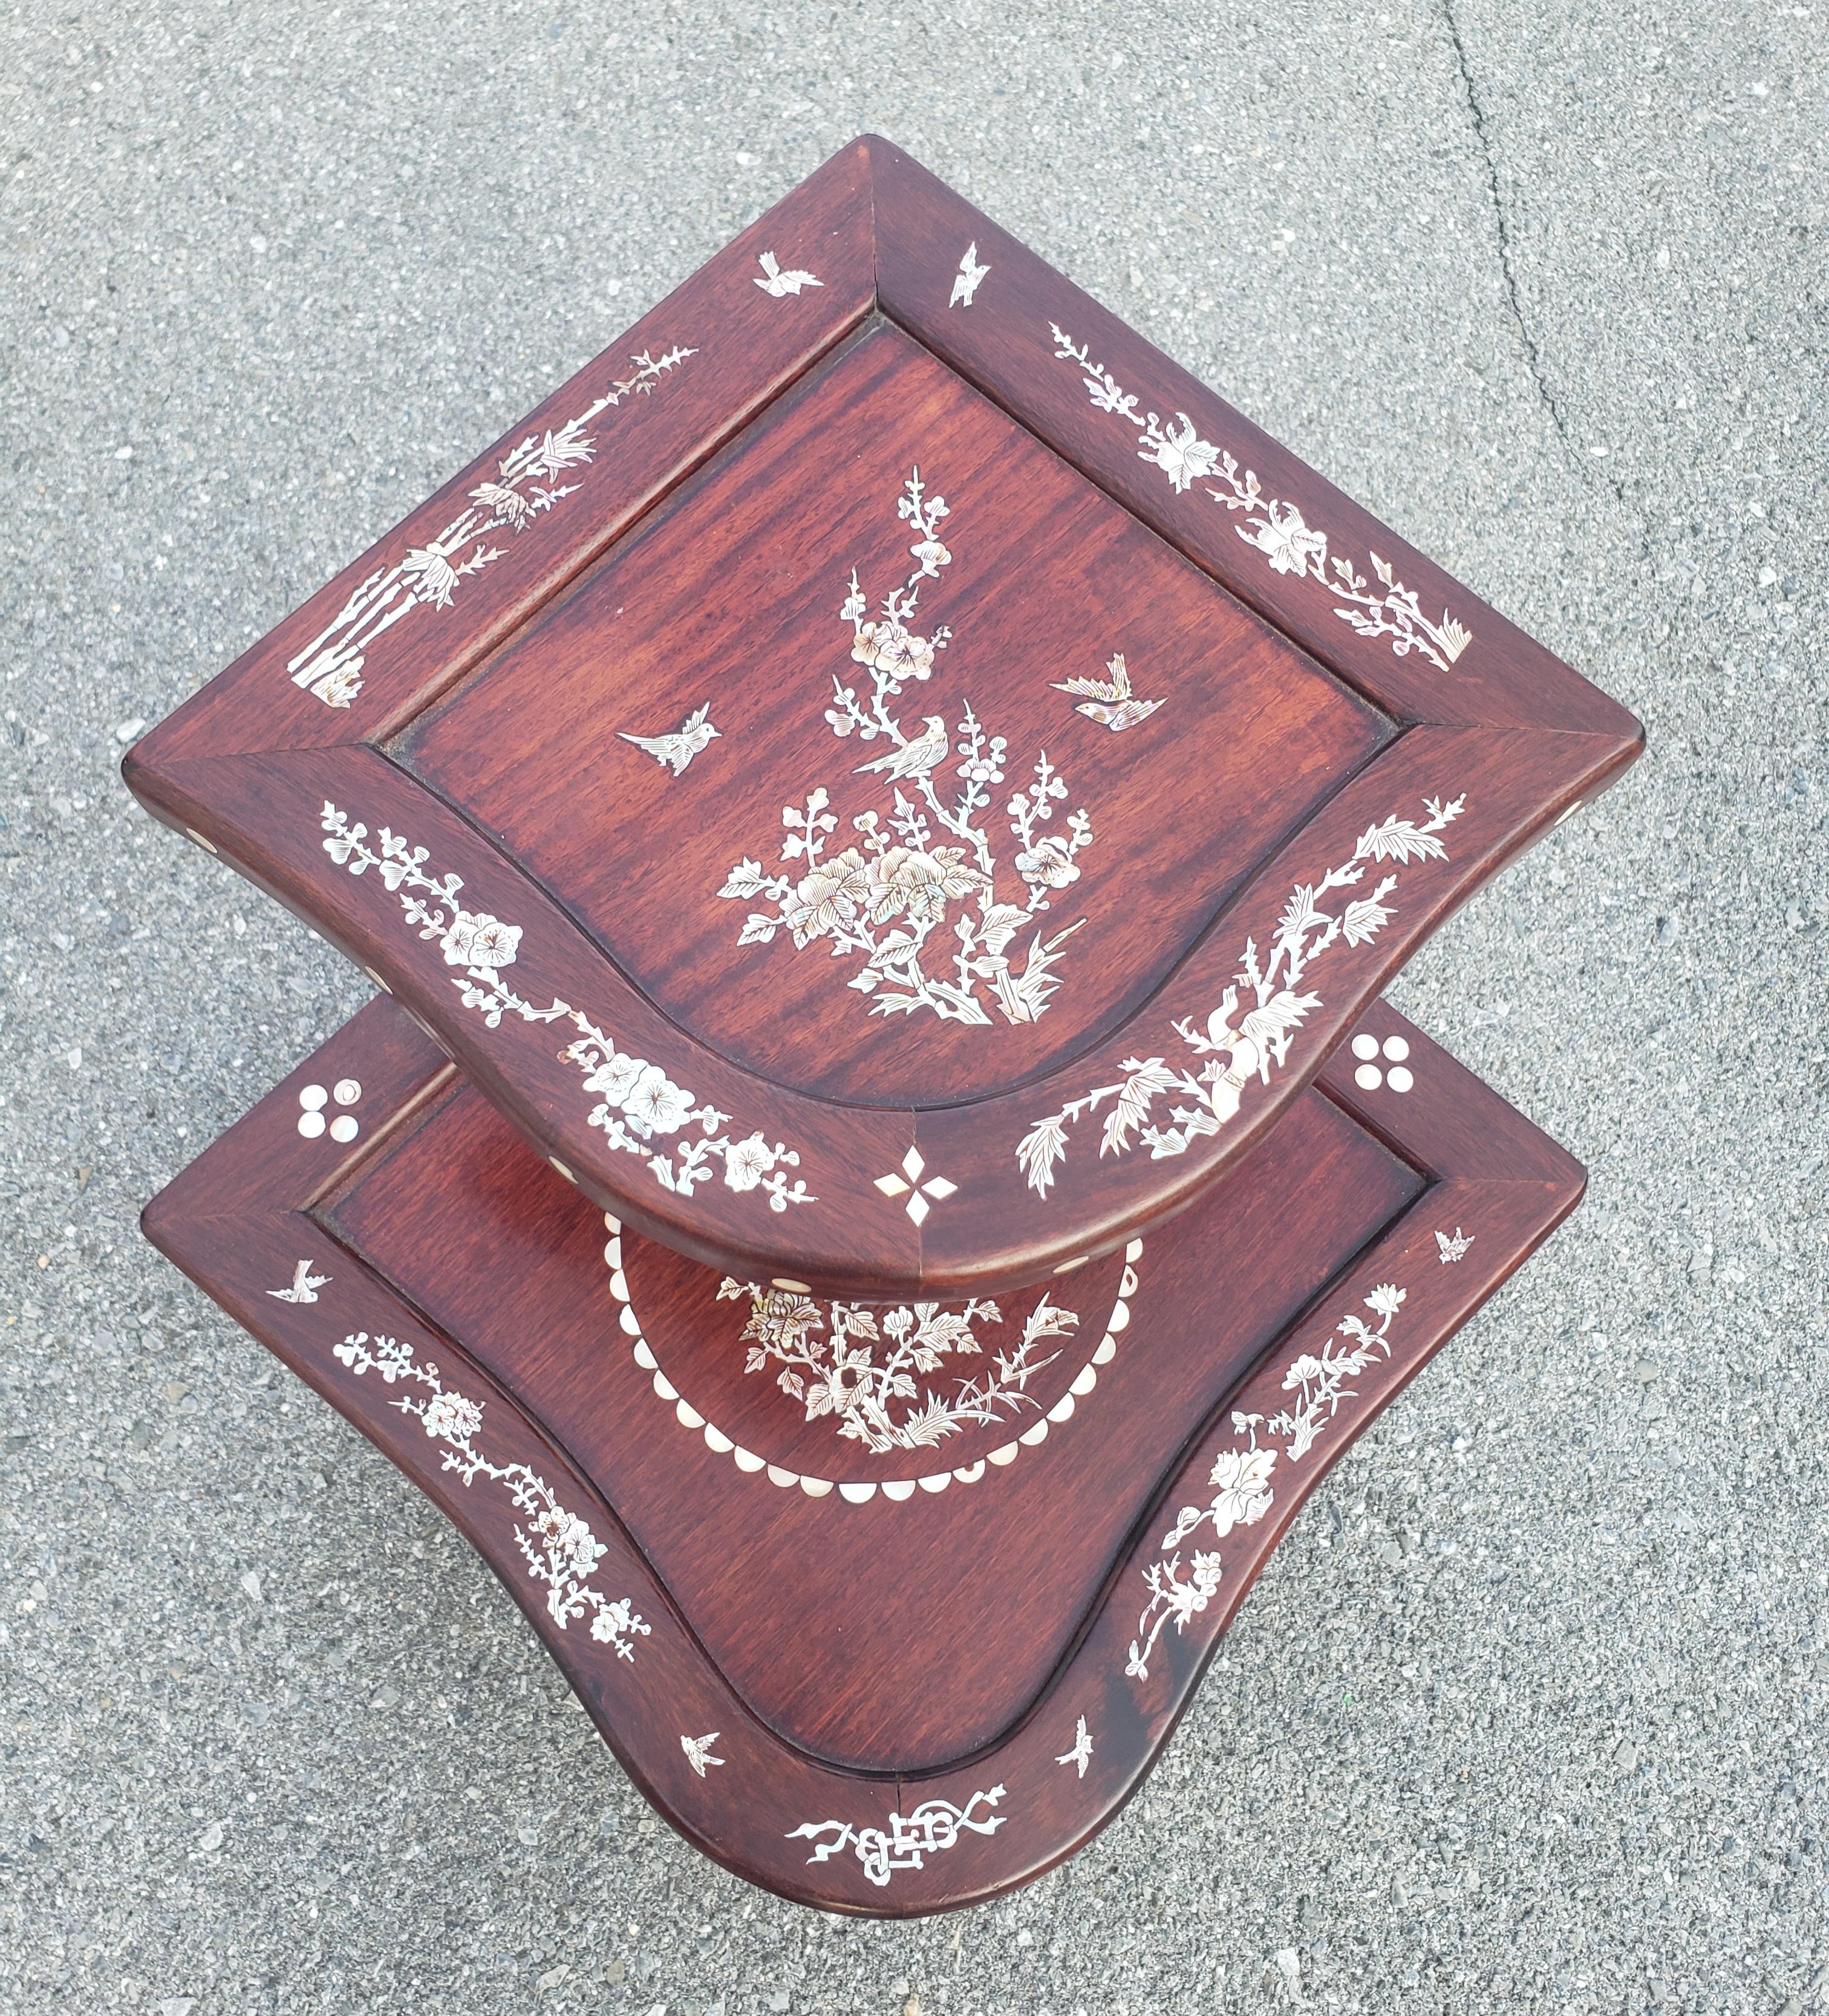 Chinese Mother-of-Pearl Inlaid Rosewood 3-tier Corner Table In Good Condition For Sale In Germantown, MD